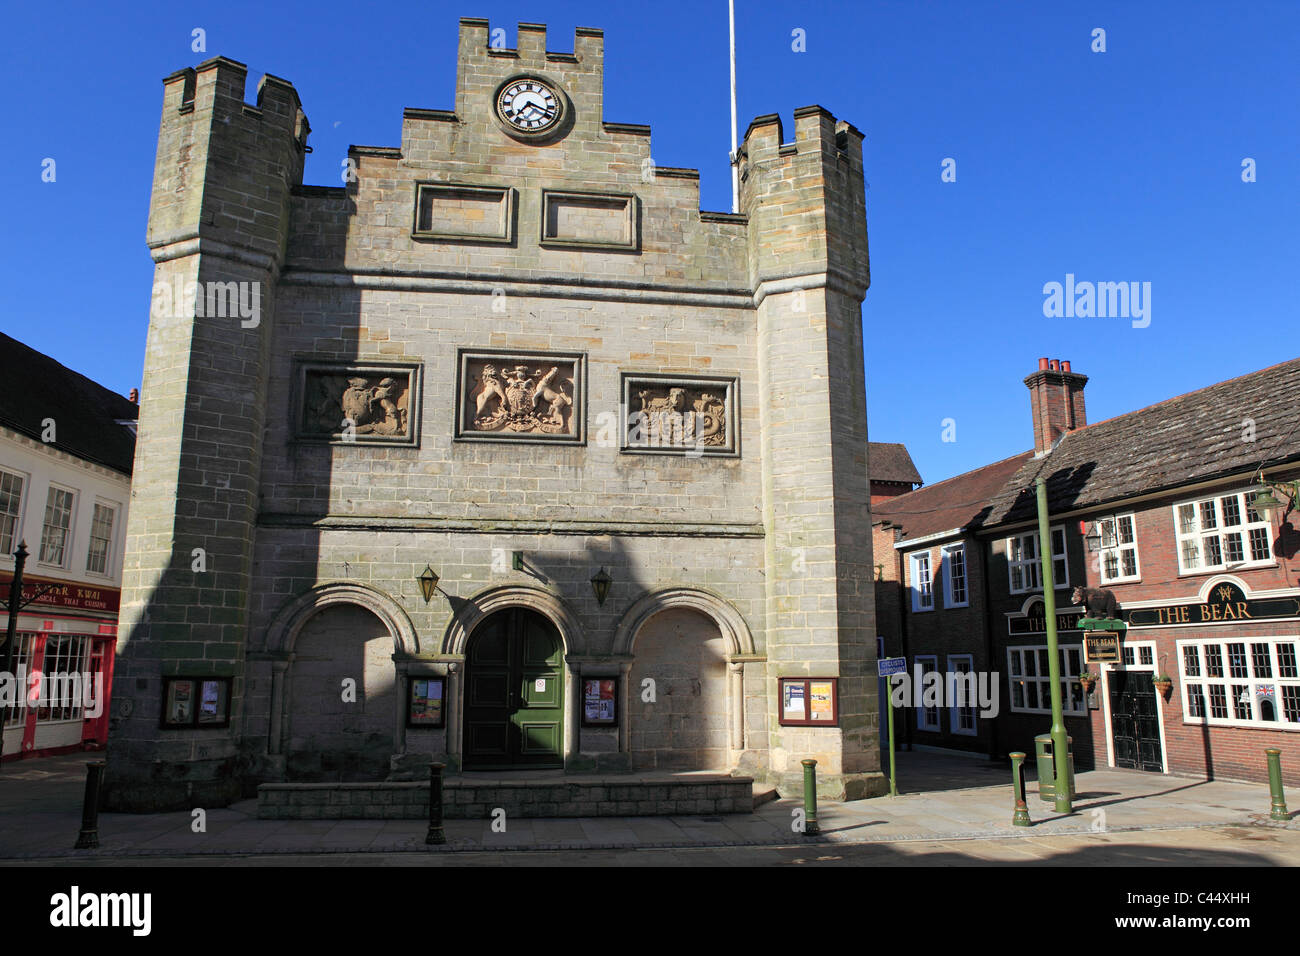 The Town Hall on the Market Square in Horsham, West Sussex, England. Stock Photo